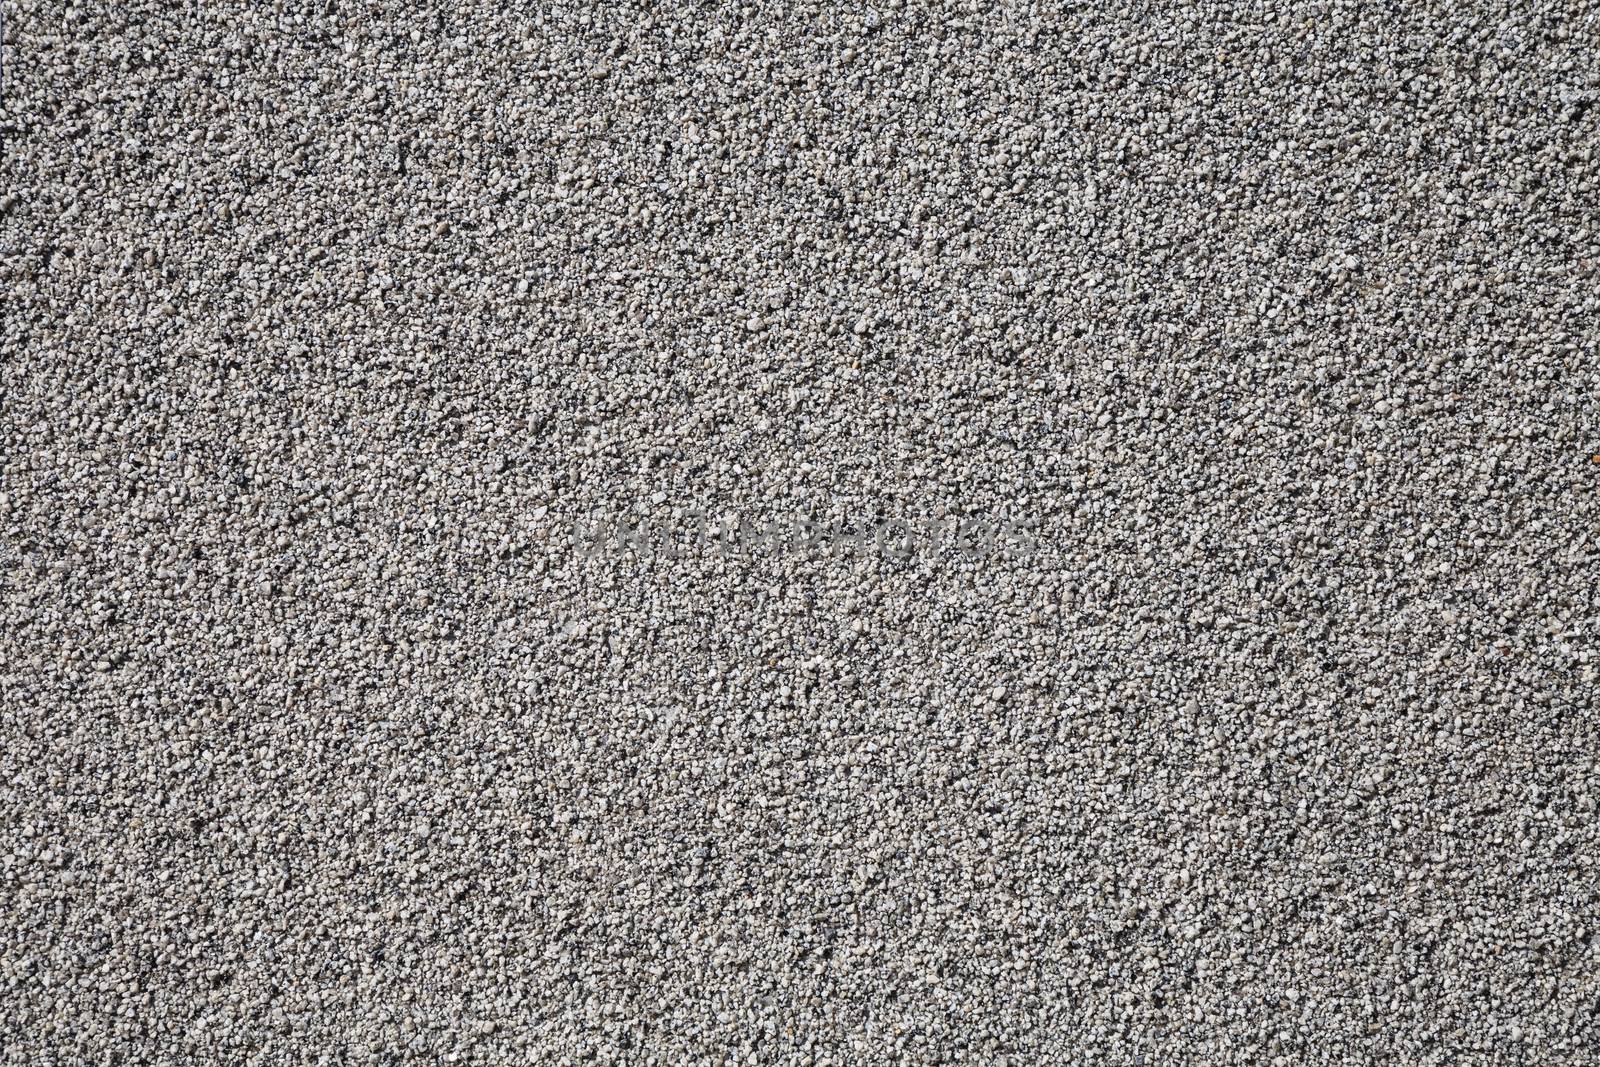 Grey wall made of very small pebble evenly spread around the wall.